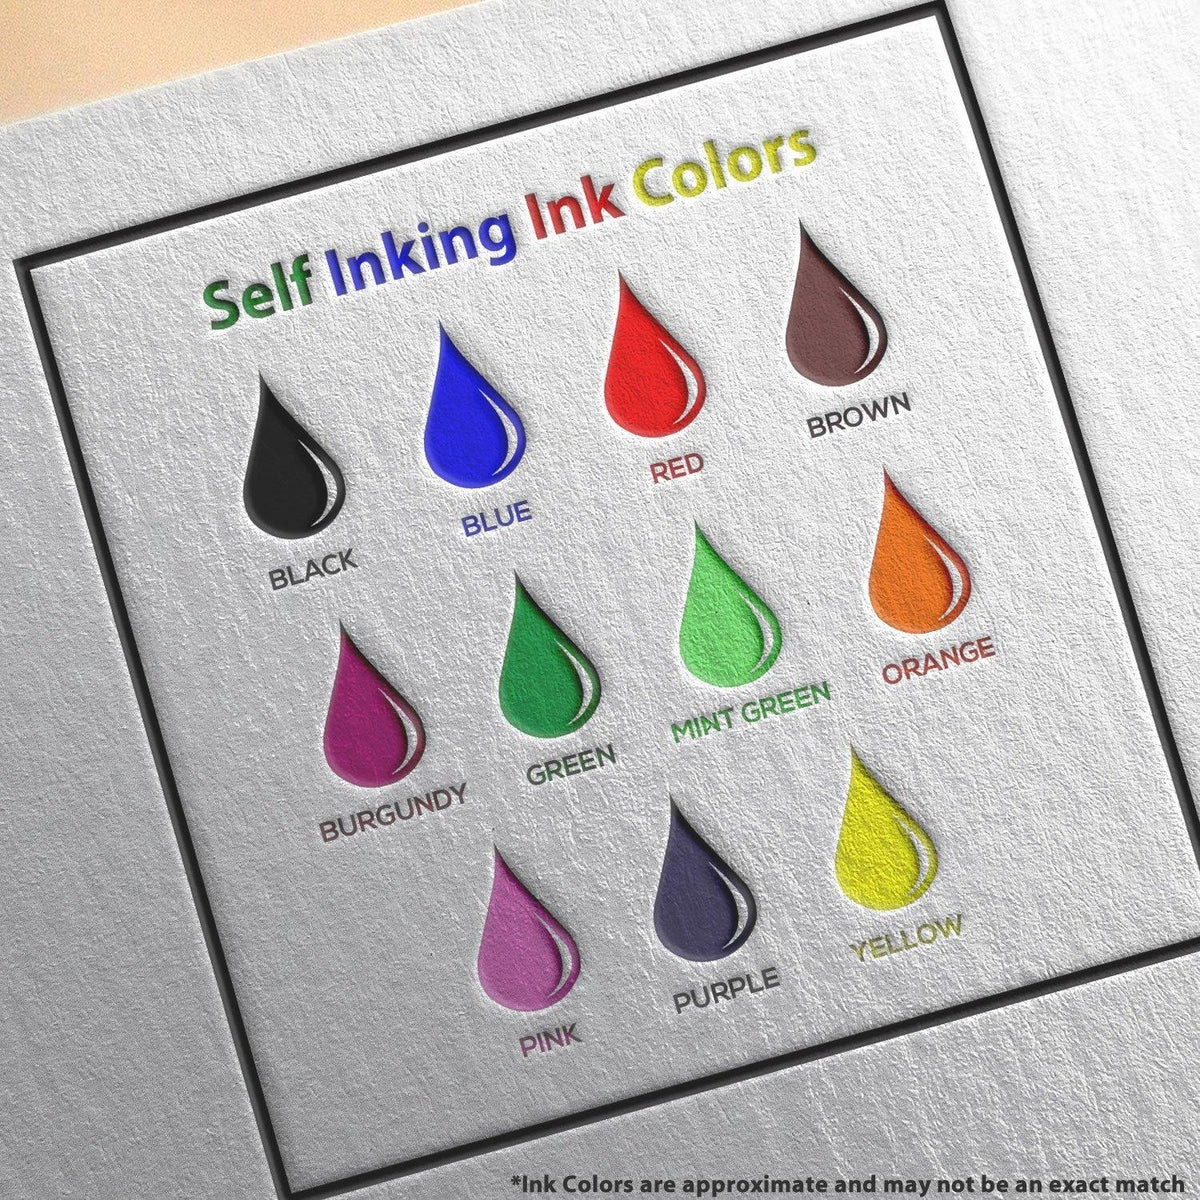 Self-Inking Fantastic with Icons Stamp - Engineer Seal Stamps - Brand_Trodat, Impression Size_Small, Stamp Type_Self-Inking Stamp, Type of Use_Teacher